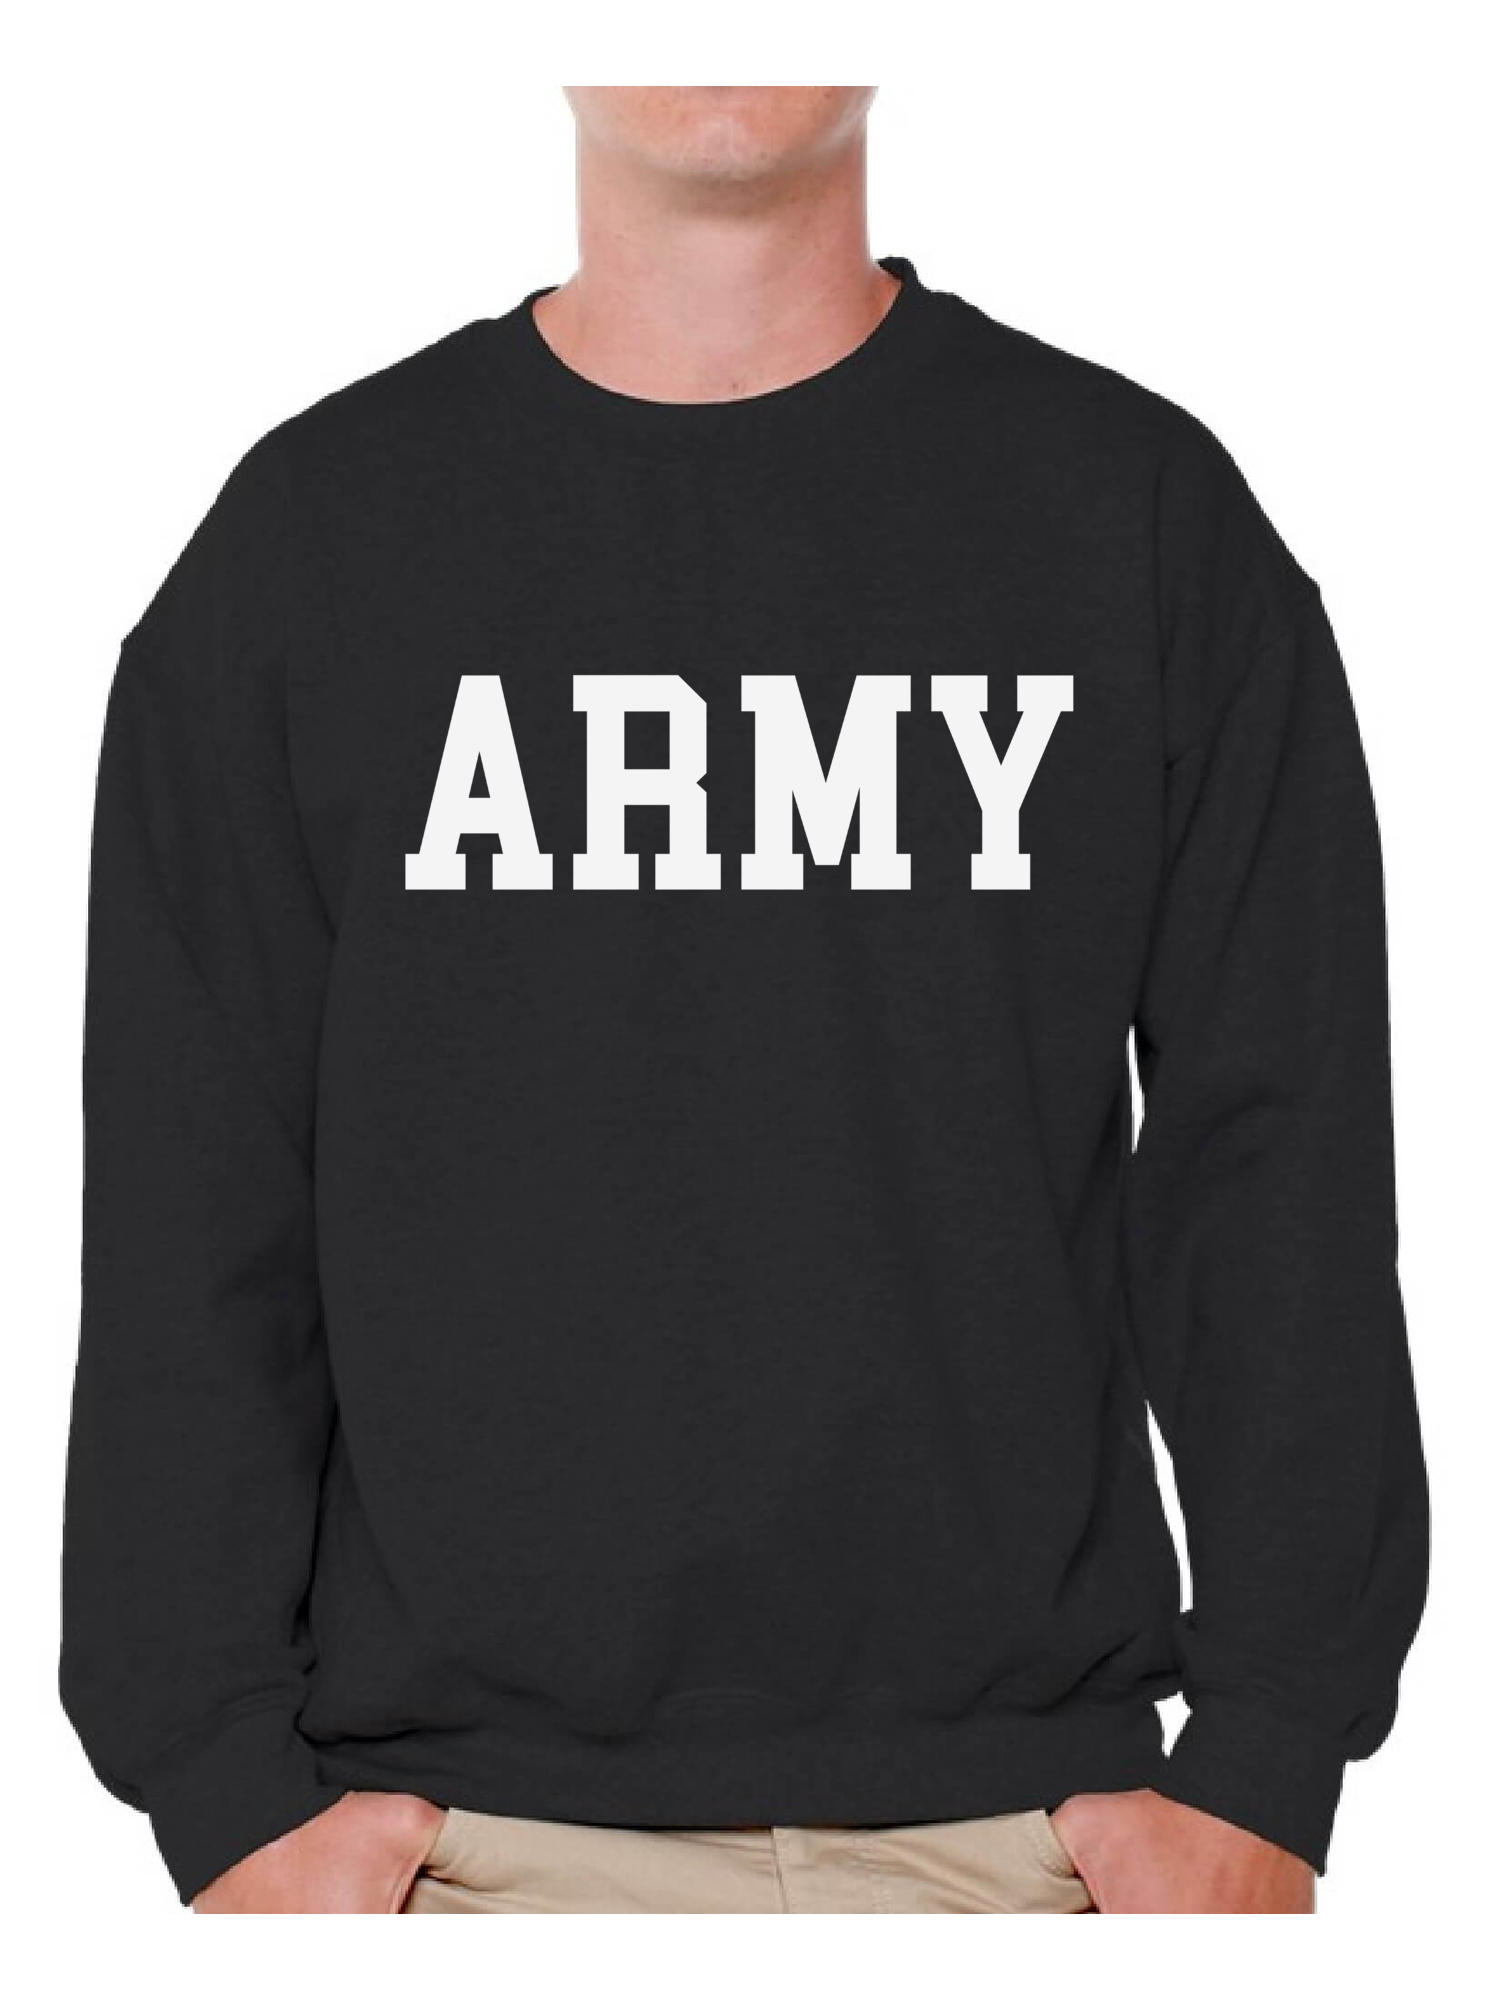 Awkward Styles Army Sweatshirt Army Pullover Sweater Army Men's Crewneck Military Gifts Army Adult Crewneck Army Homecoming Suprise Party Sweatshirt Army Training Sweater Military Adult Jumper - image 1 of 4